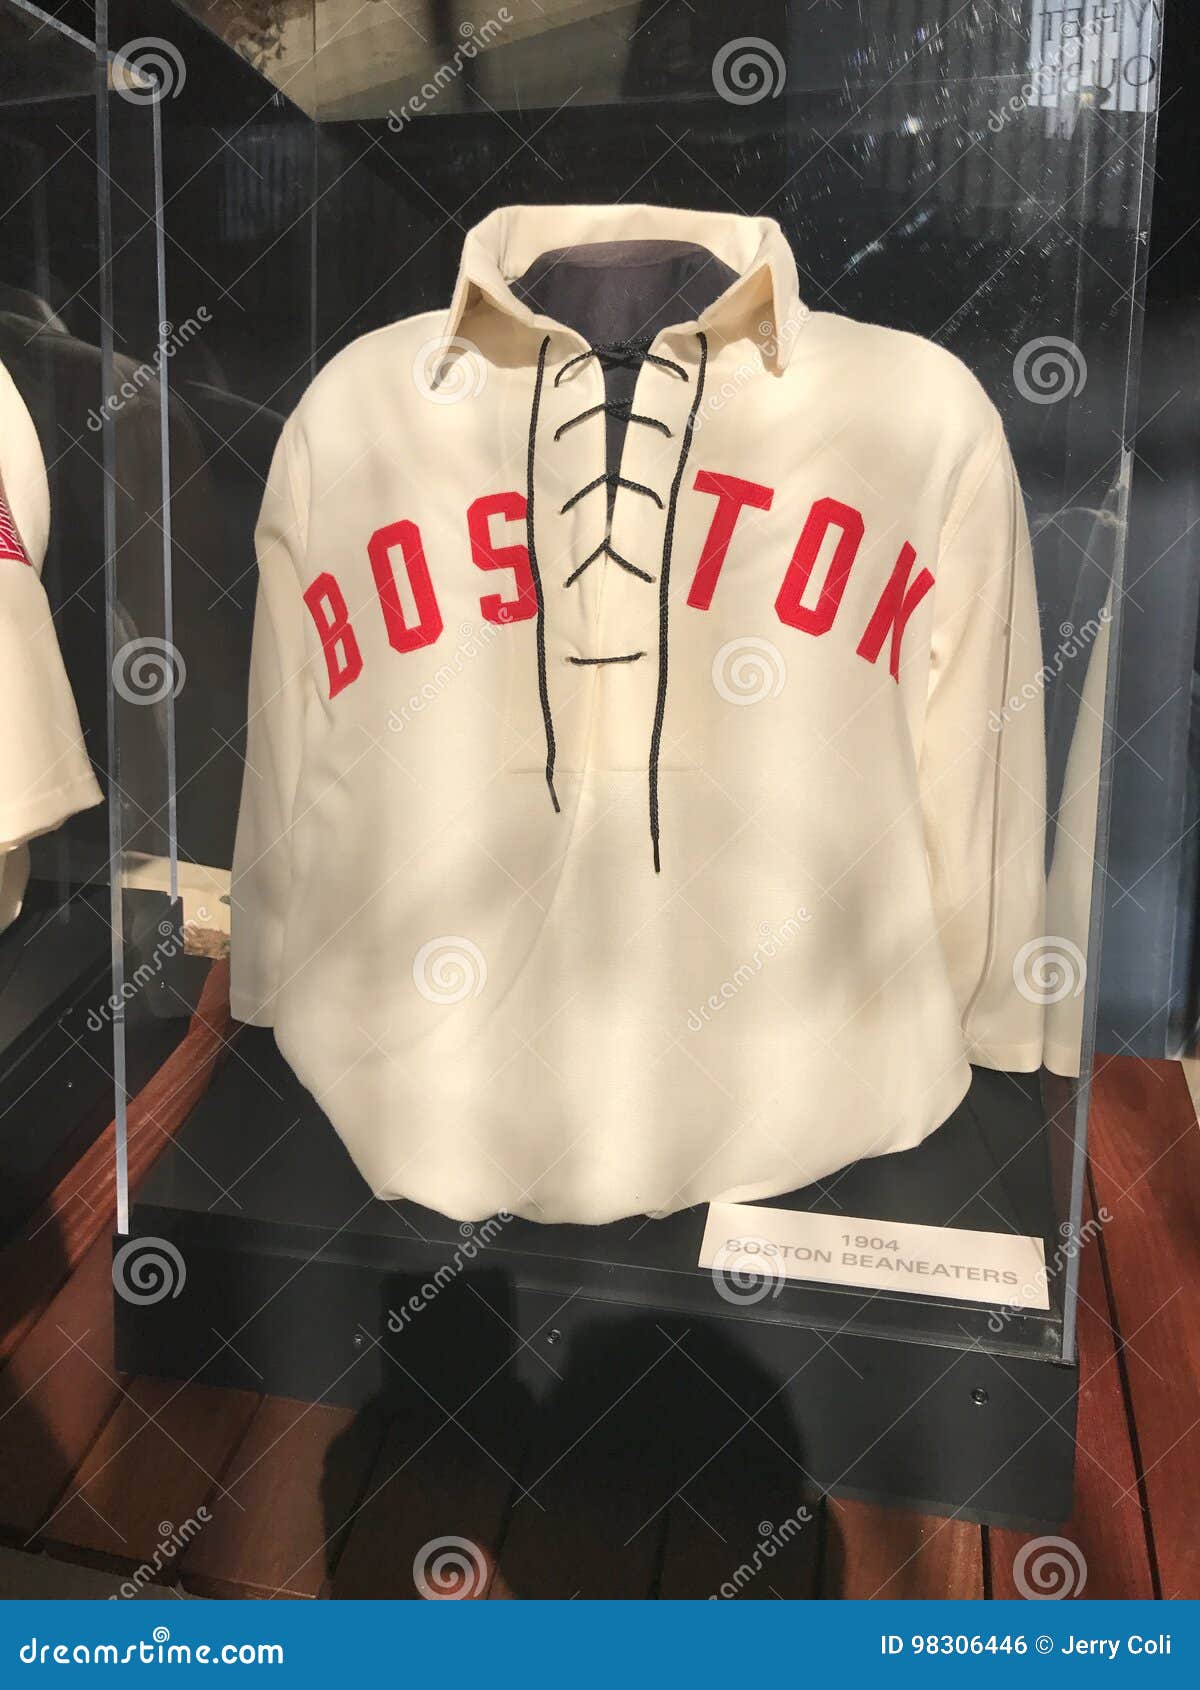 Replica 1904 Boston Beaneaters Jersey Editorial Photo - Image of ticket,  game: 98306446